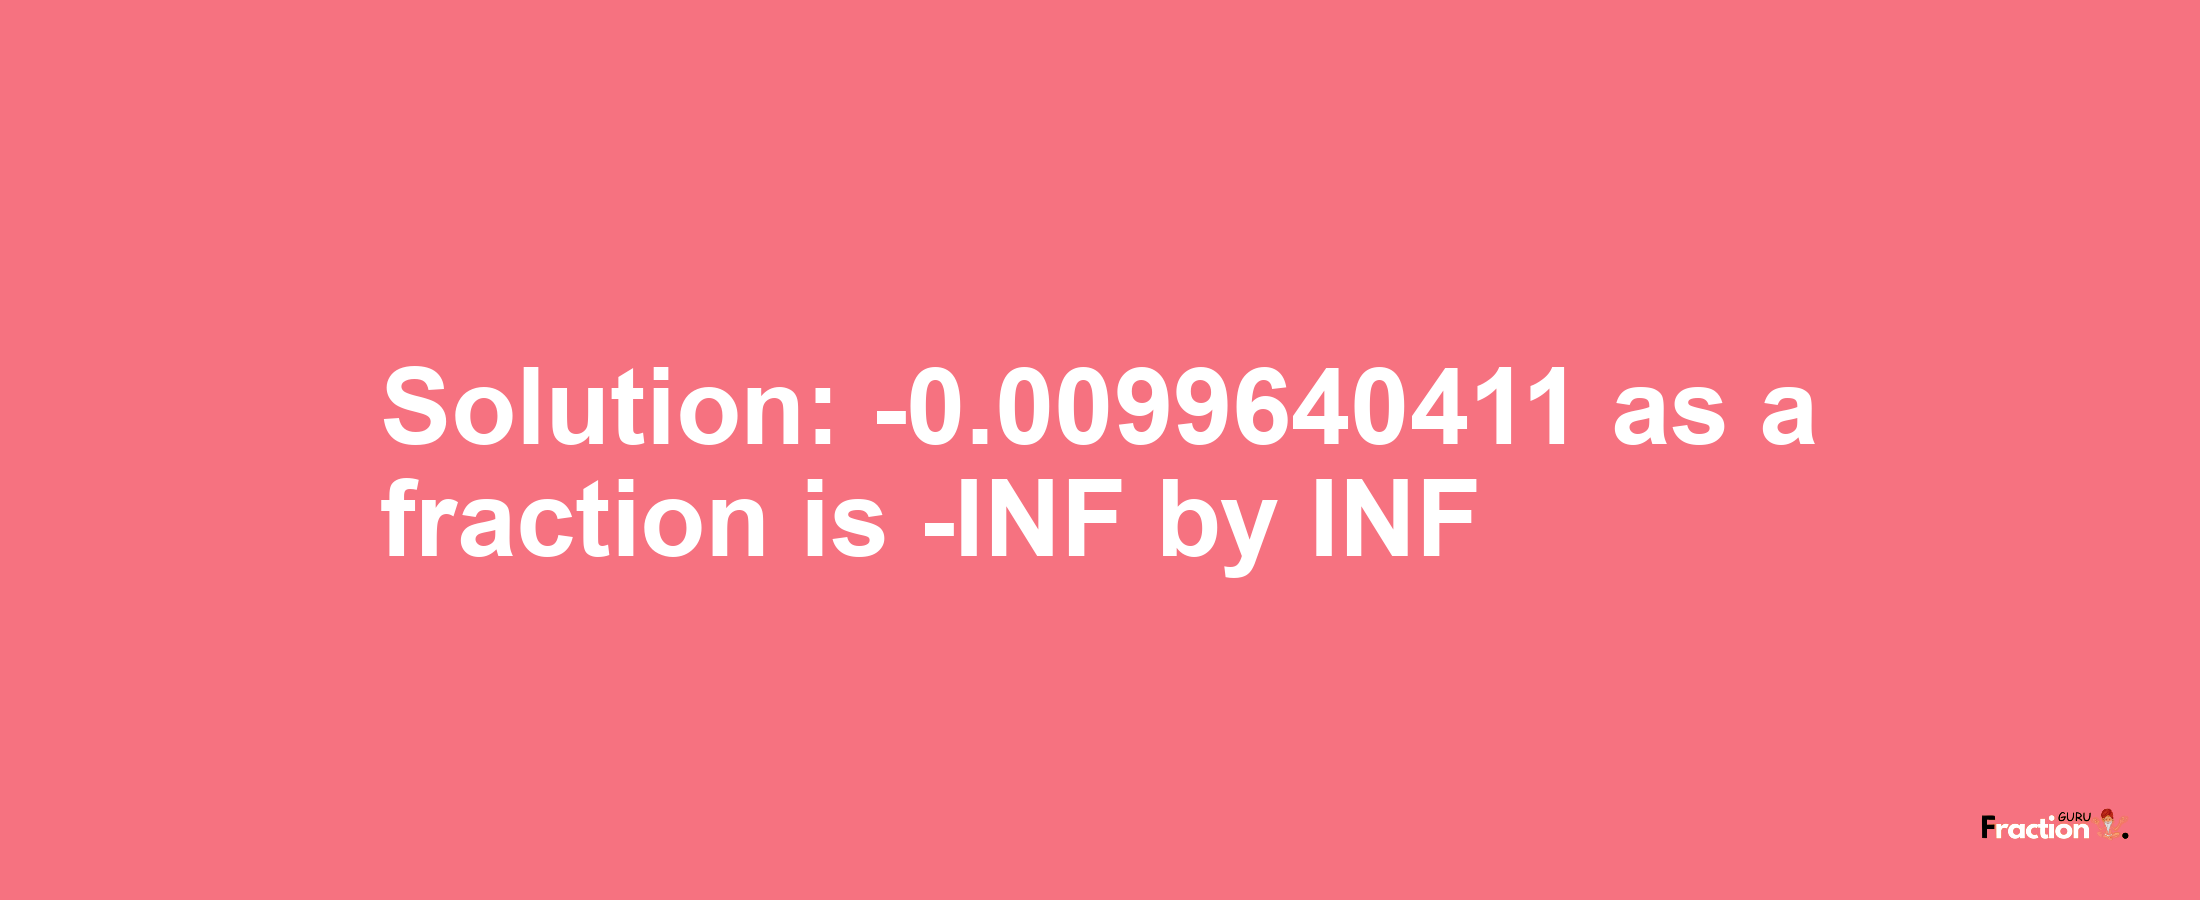 Solution:-0.0099640411 as a fraction is -INF/INF